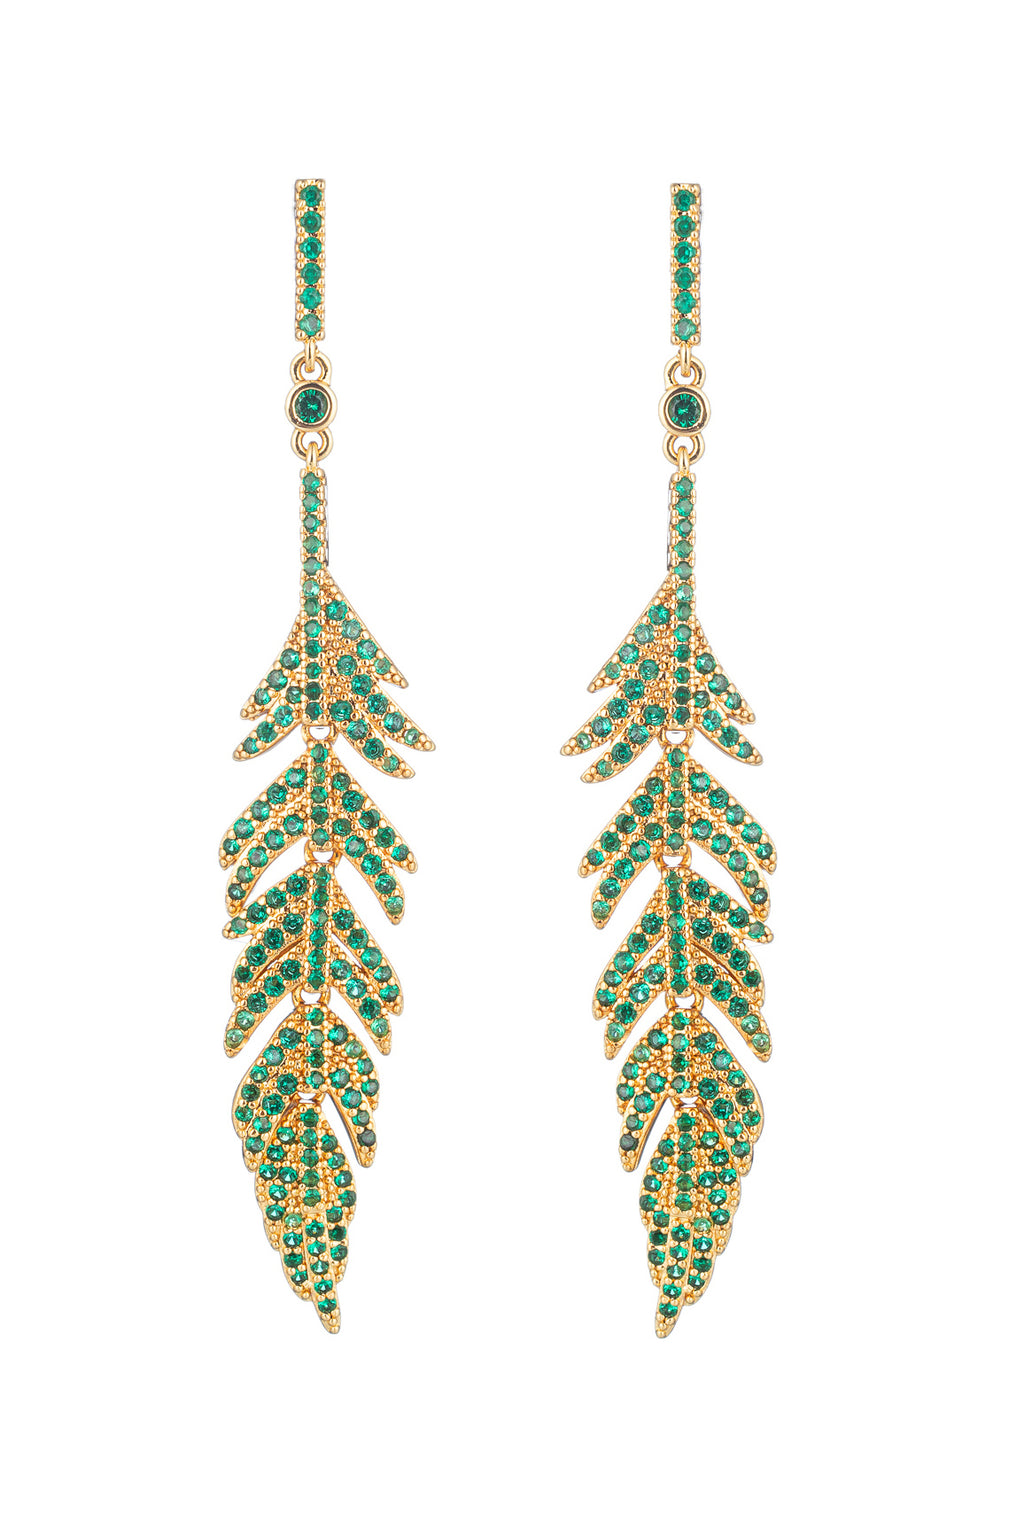 Gold tone brass feather drop earrings studded with green CZ crystals.